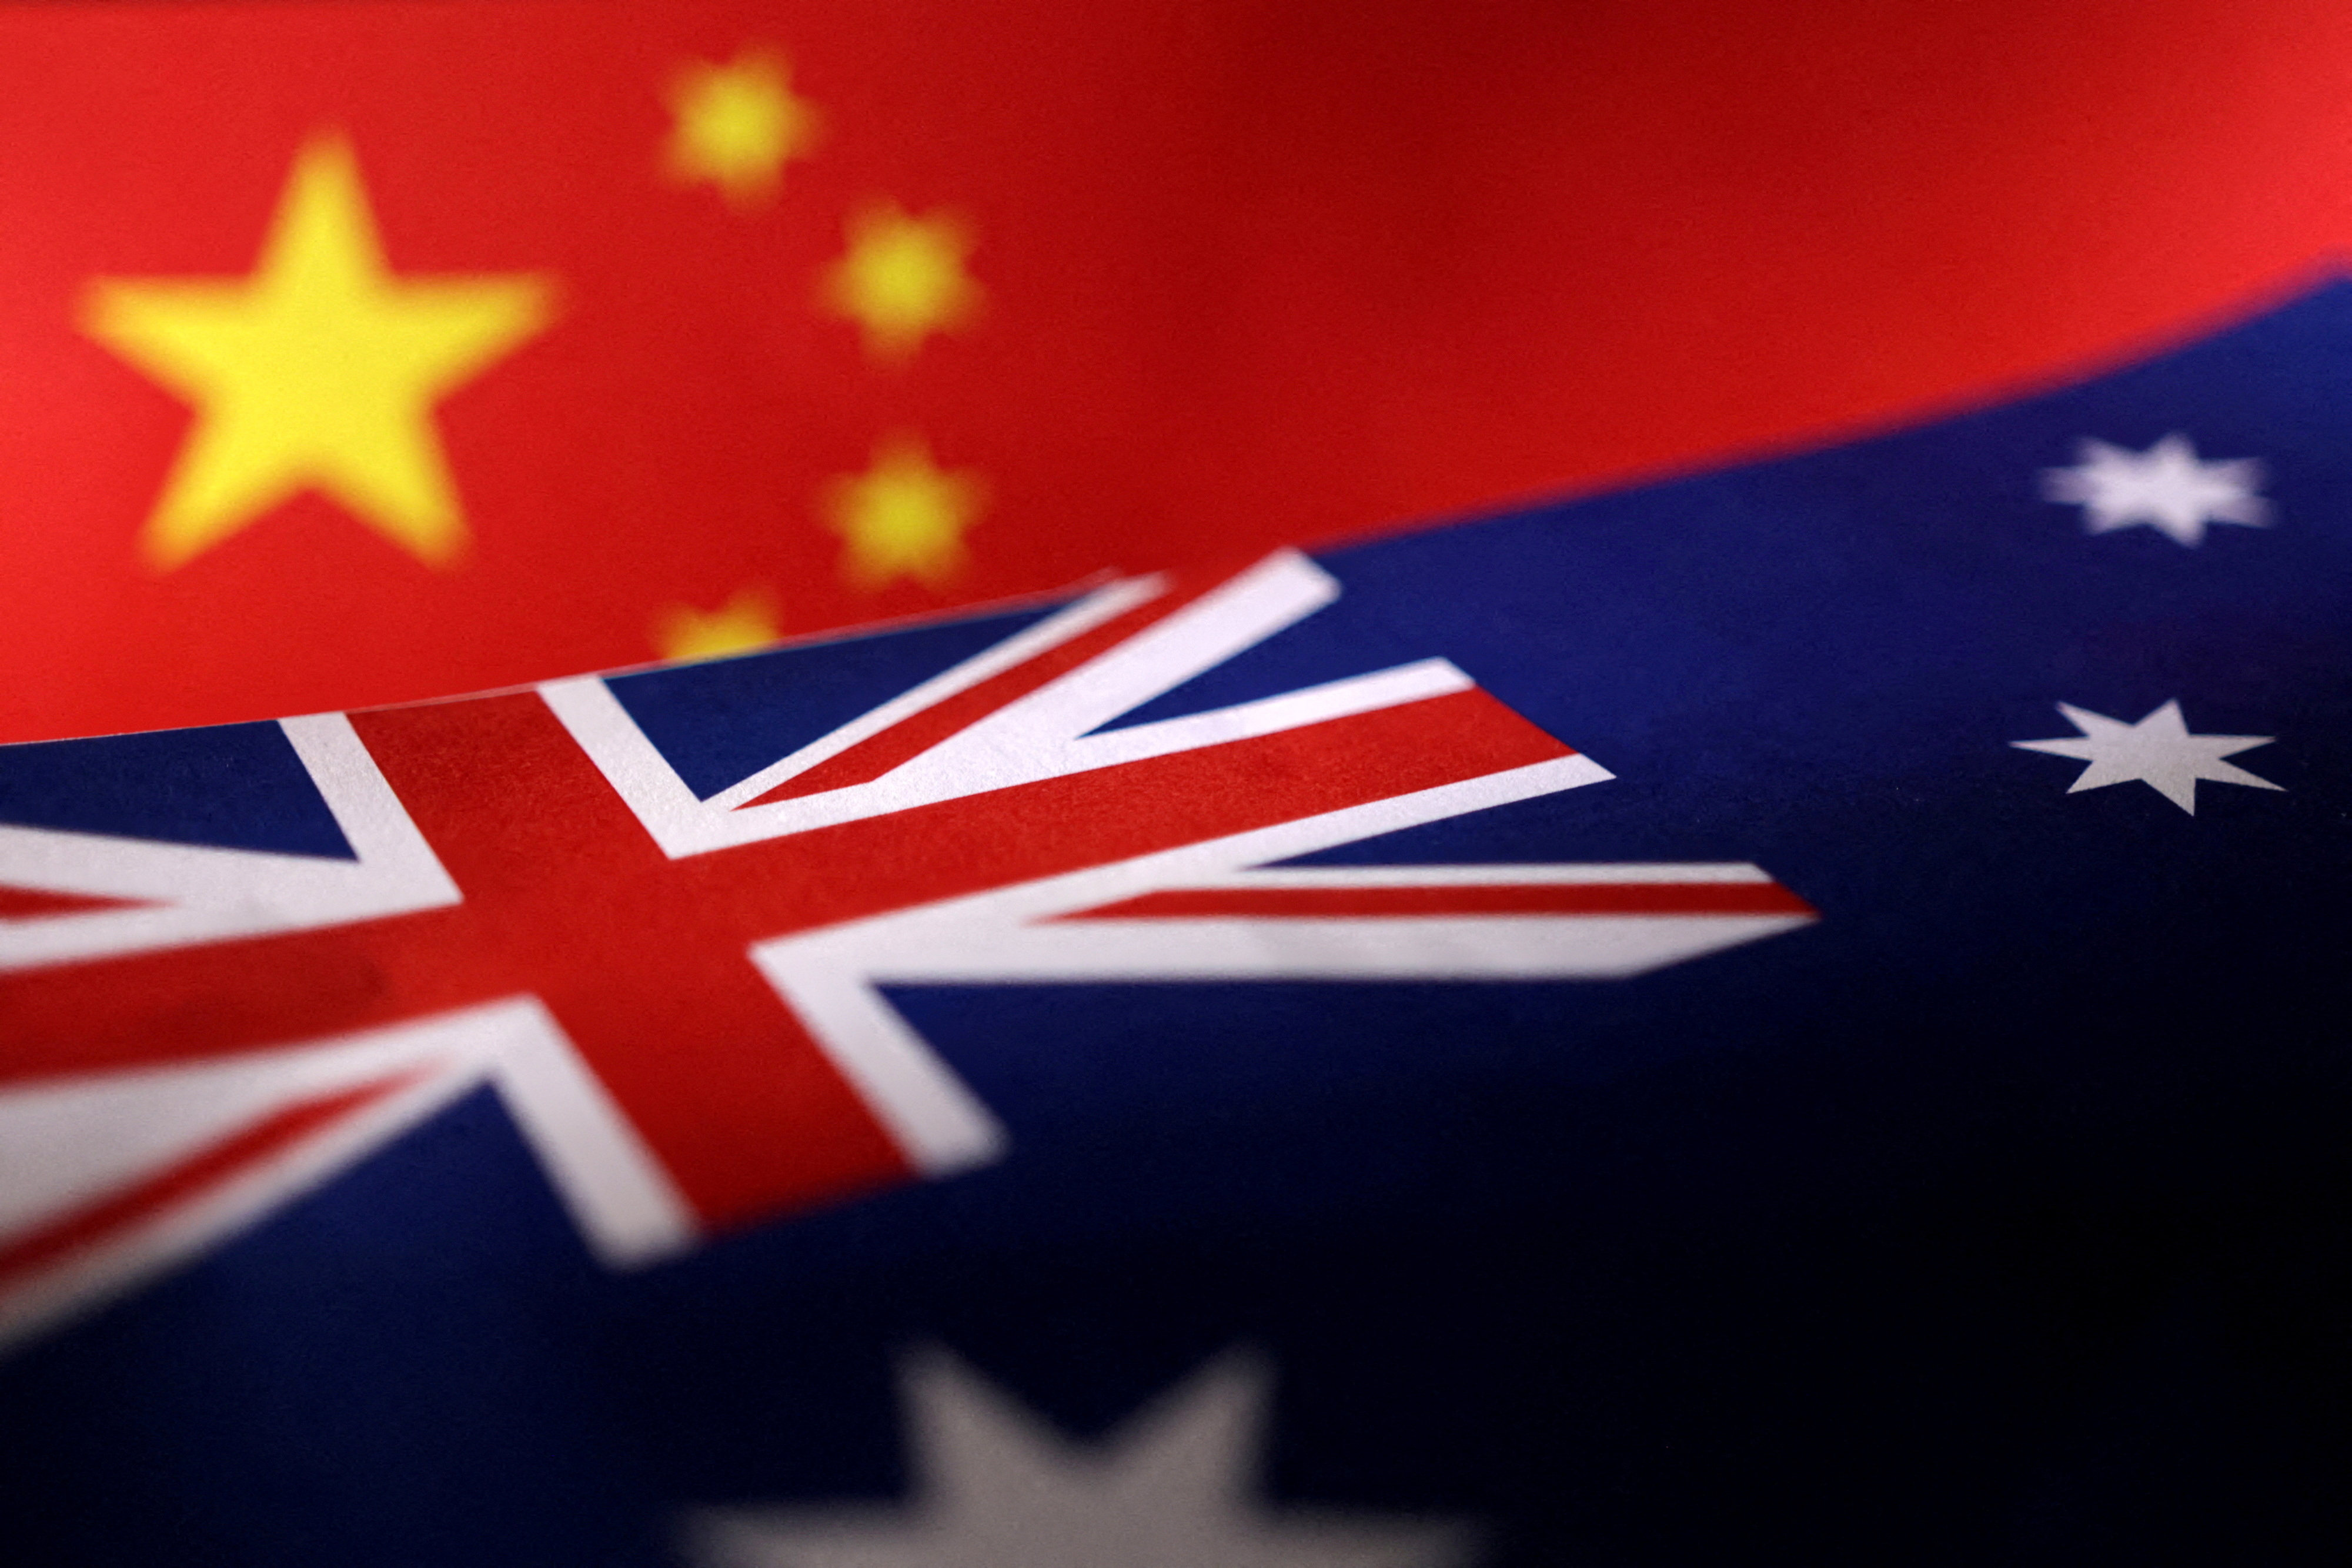 By potentially visiting China this year, Australia’s prime minister hopes to show that Beijing and Canberra have restarted their normal relationship, sources say. Photo: Reuters